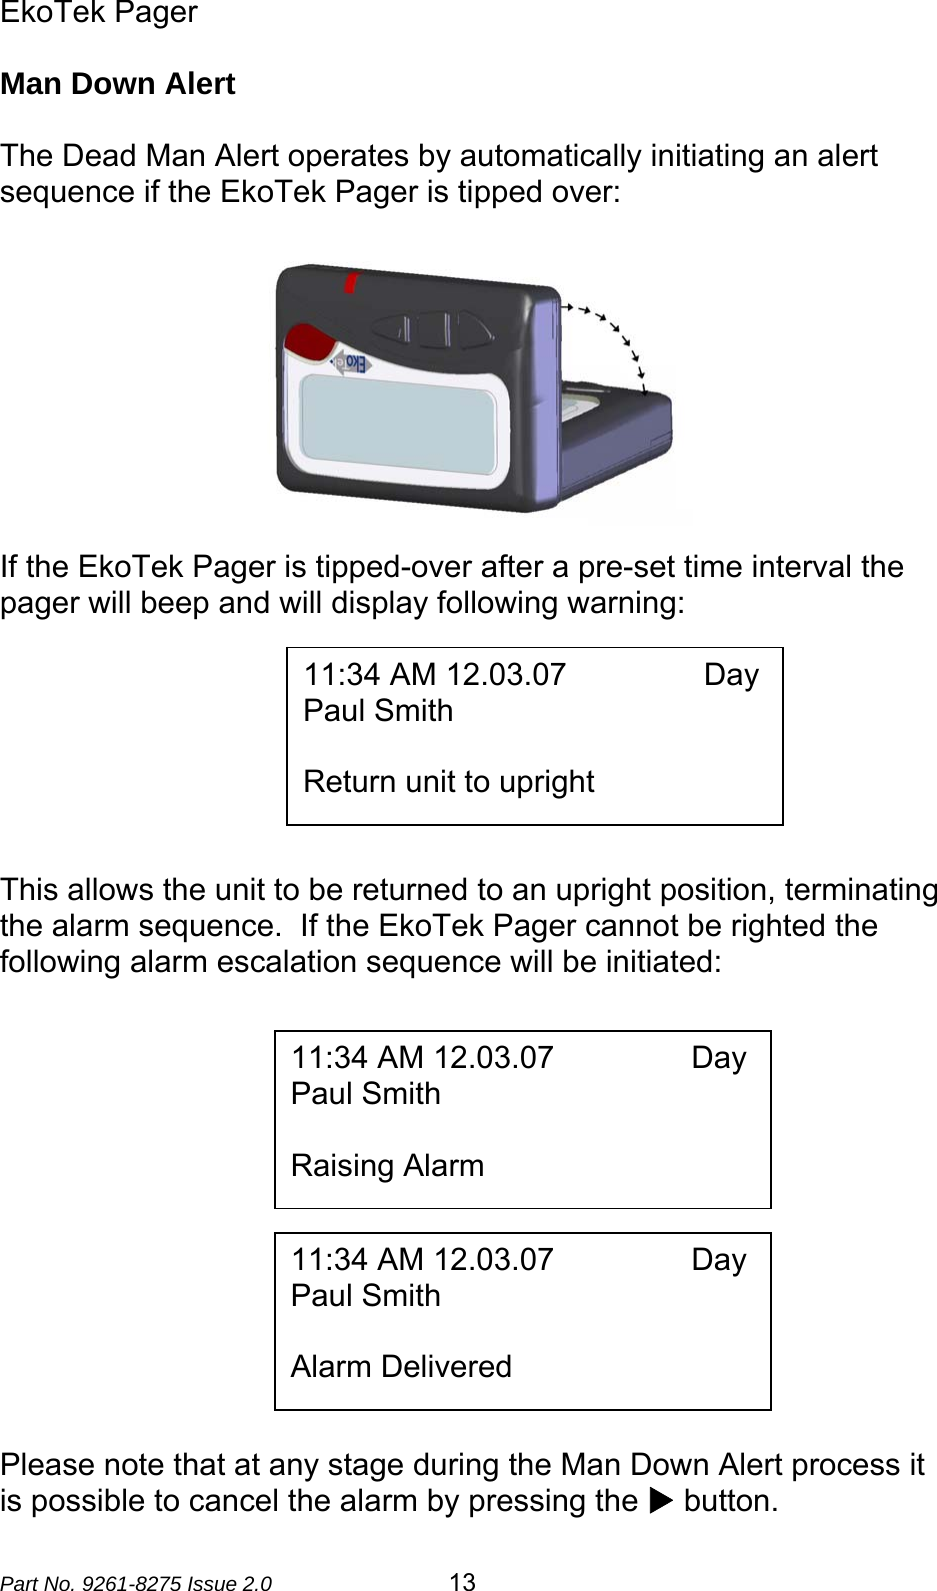 EkoTek Pager  Part No. 9261-8275 Issue 2.0  13 Man Down Alert  The Dead Man Alert operates by automatically initiating an alert sequence if the EkoTek Pager is tipped over:   If the EkoTek Pager is tipped-over after a pre-set time interval the pager will beep and will display following warning:          This allows the unit to be returned to an upright position, terminating the alarm sequence.  If the EkoTek Pager cannot be righted the following alarm escalation sequence will be initiated:               Please note that at any stage during the Man Down Alert process it is possible to cancel the alarm by pressing the X button. 11:34 AM 12.03.07                Day Paul Smith  Return unit to upright 11:34 AM 12.03.07                Day Paul Smith  Raising Alarm 11:34 AM 12.03.07                Day Paul Smith  Alarm Delivered 